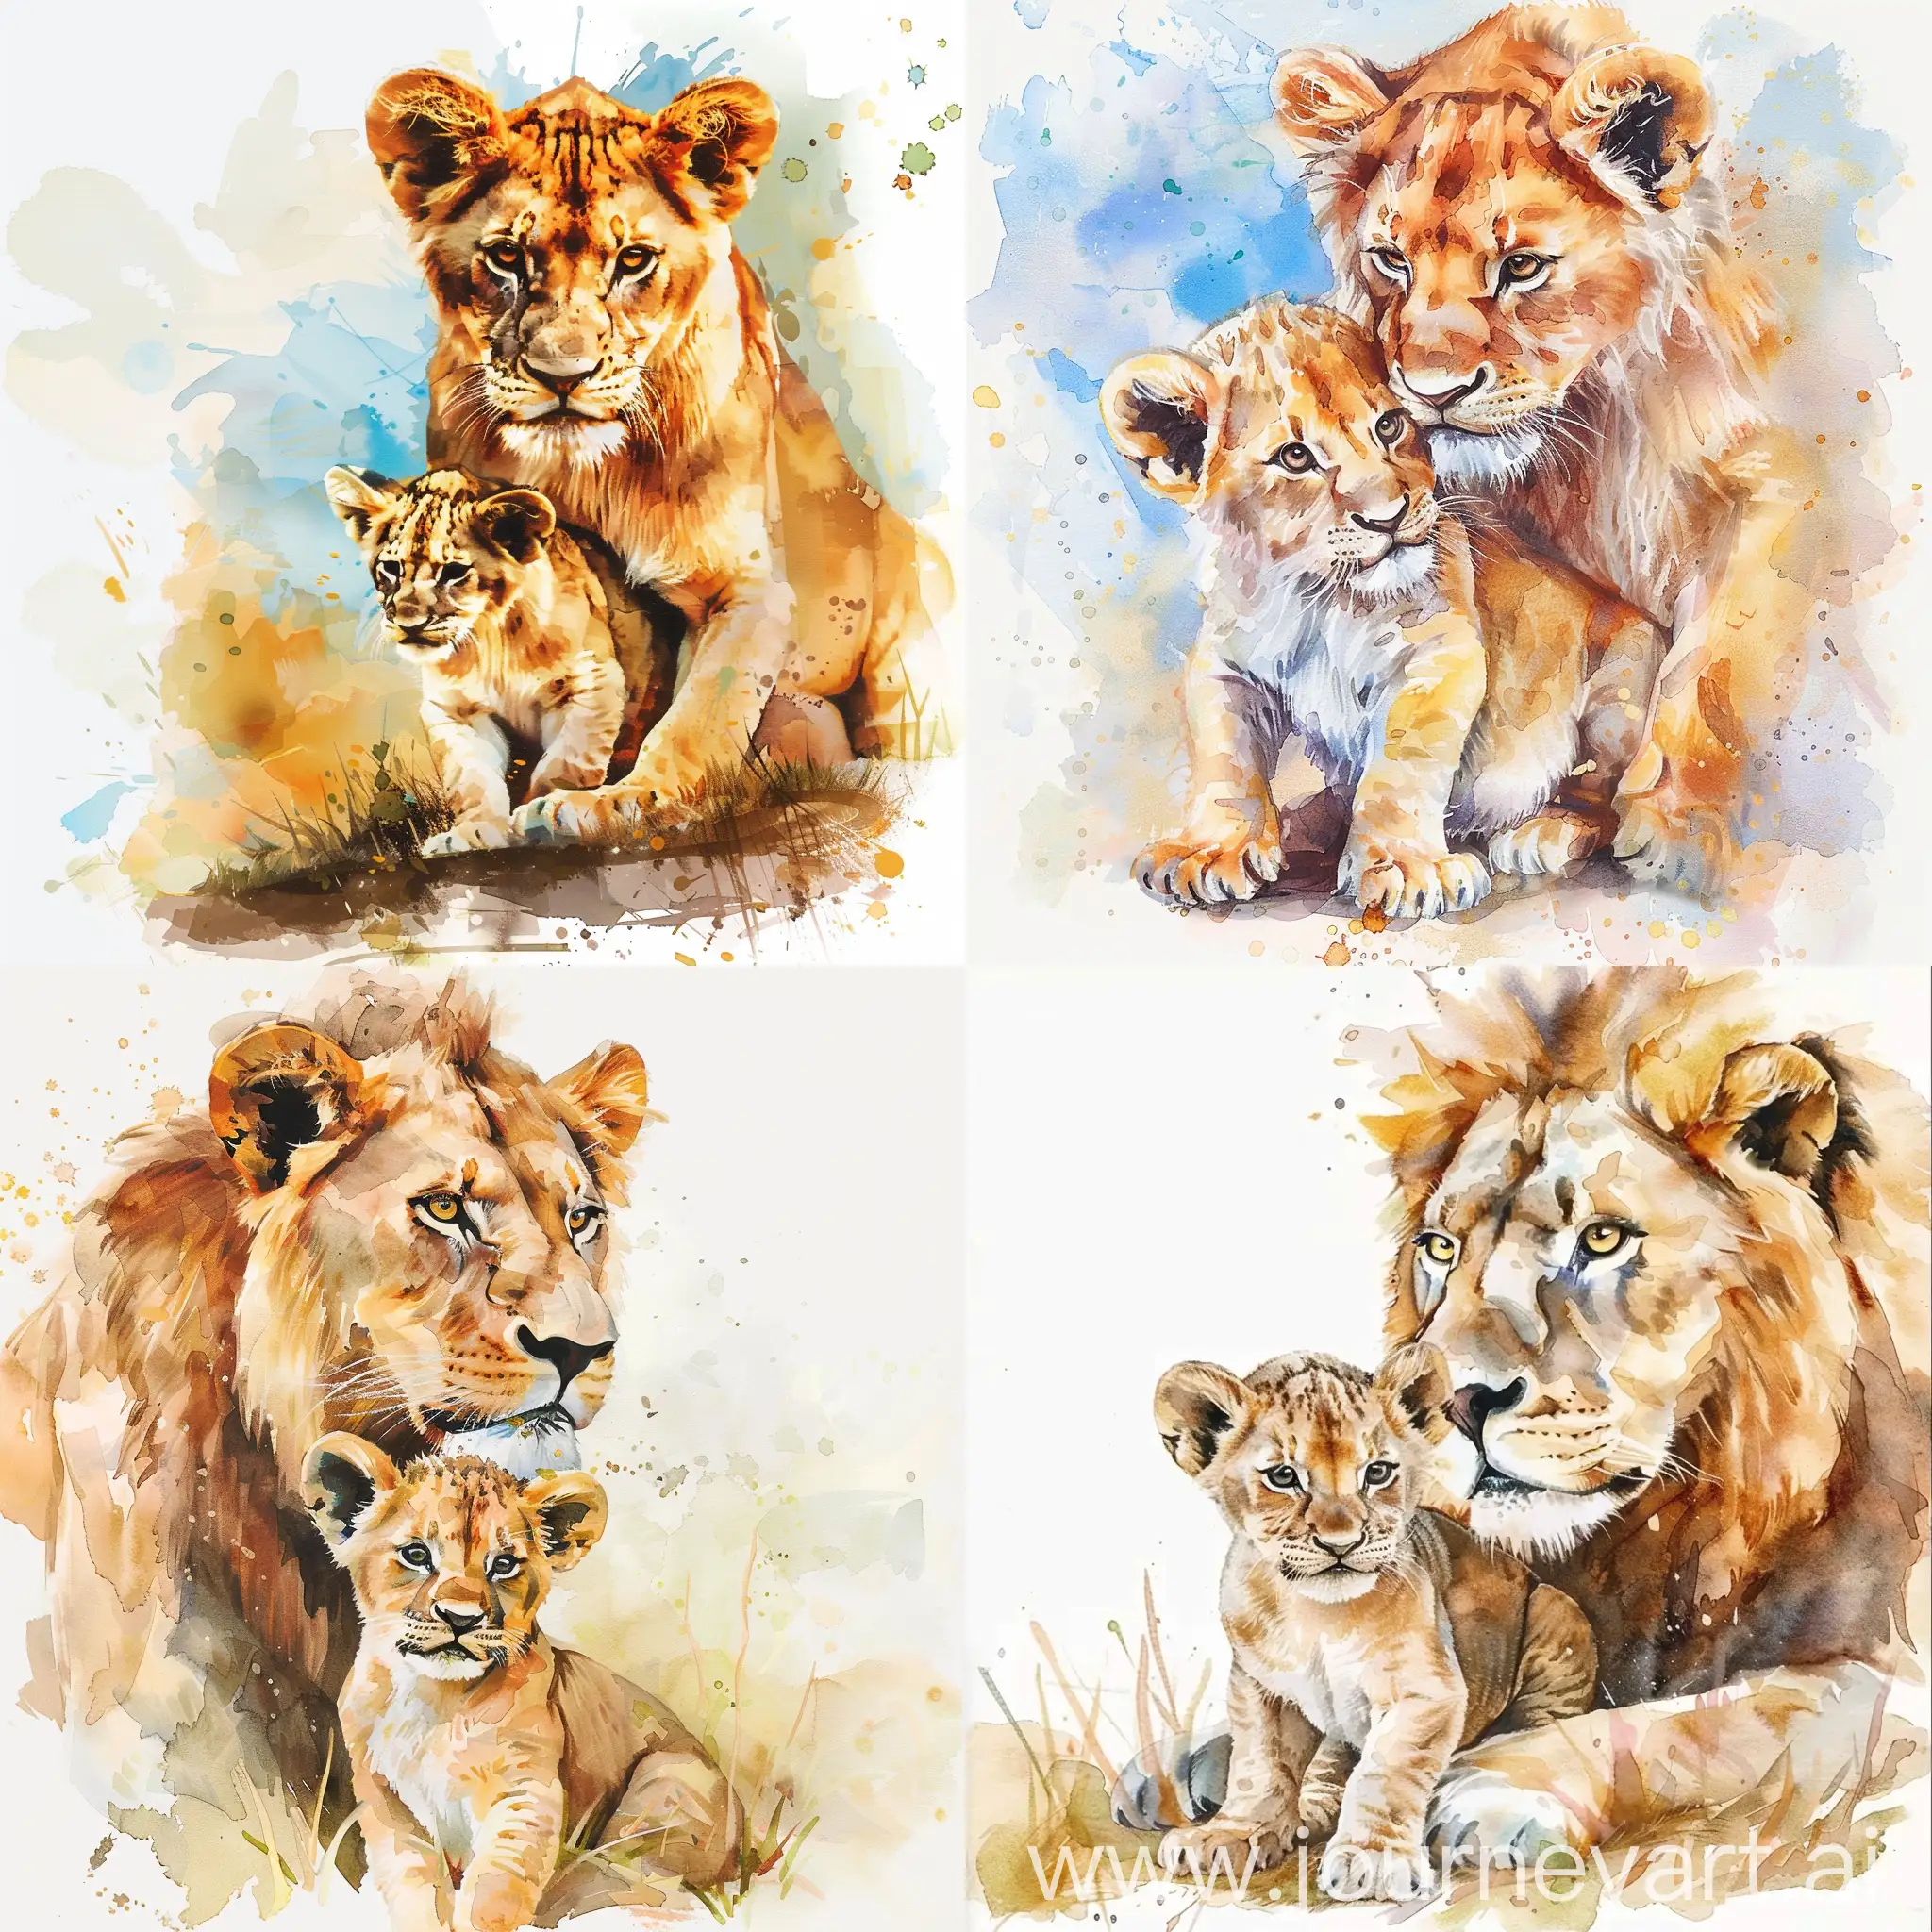 Watercolor baby room nursery wall art. Use pastel colors. Wild baby lion cub with mother lion on wildlife landscape.
